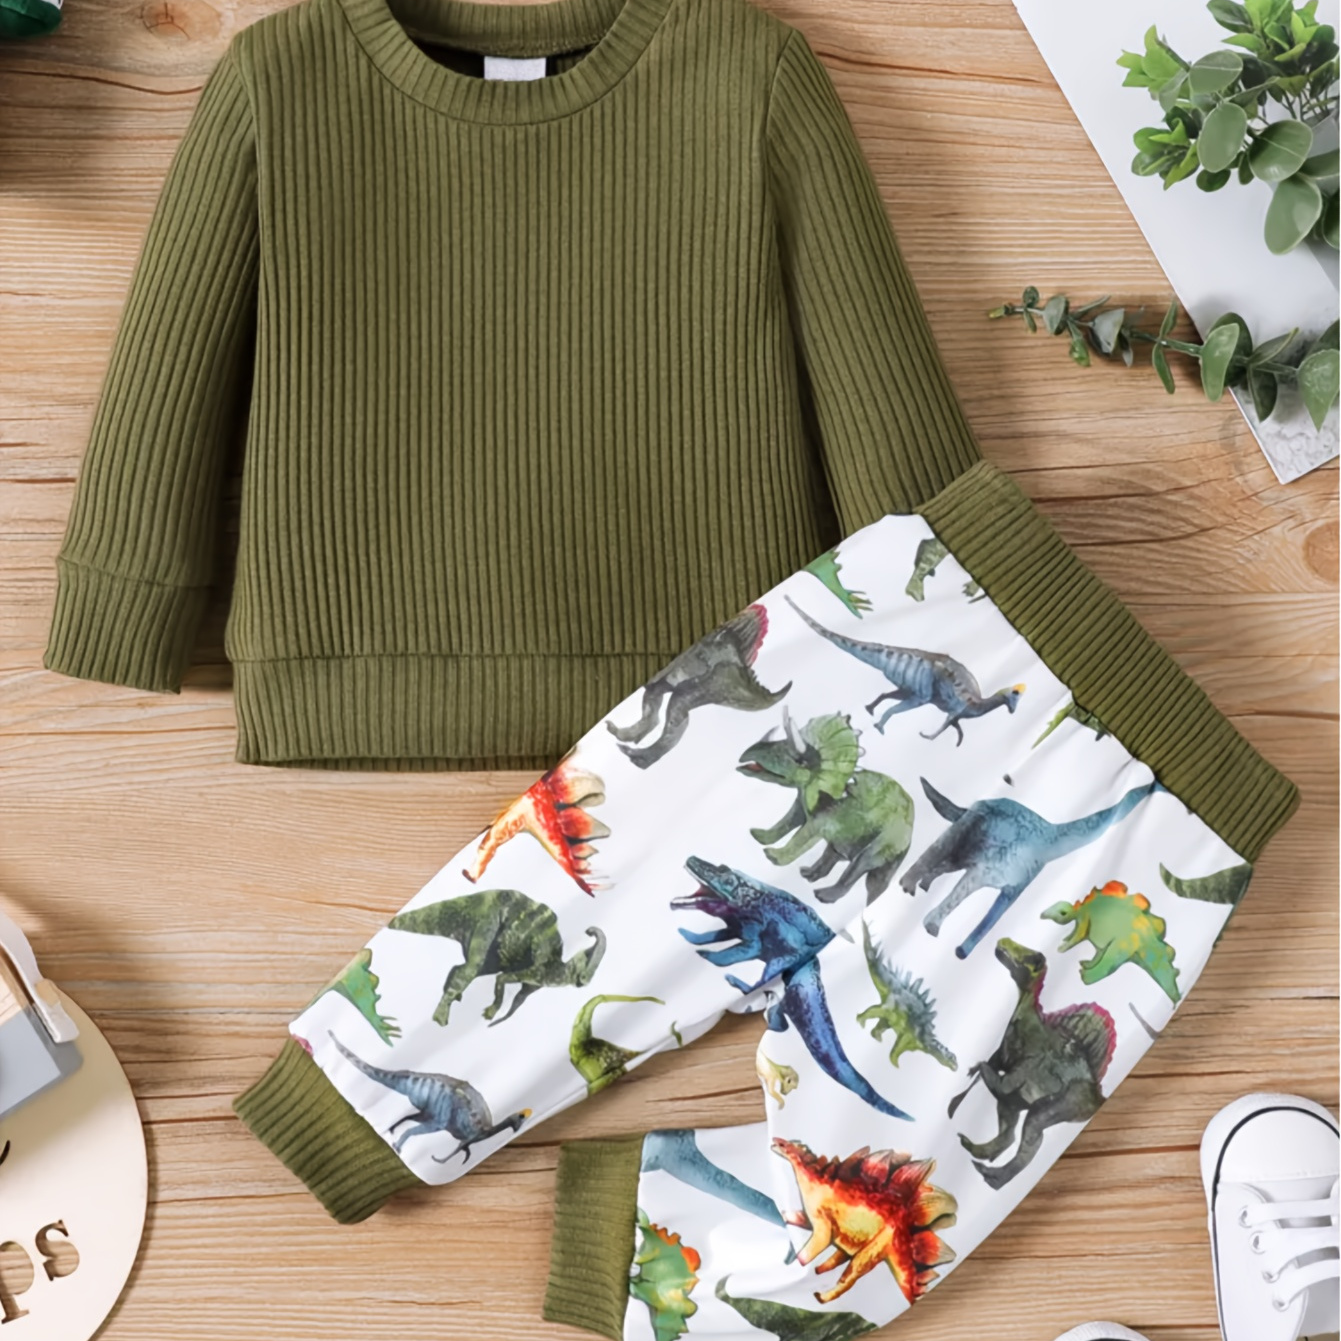 

Popular Boy's 2pcs Outfits - Toddler's Long Sleeve Tops And Dinosaur Printed Pants Set